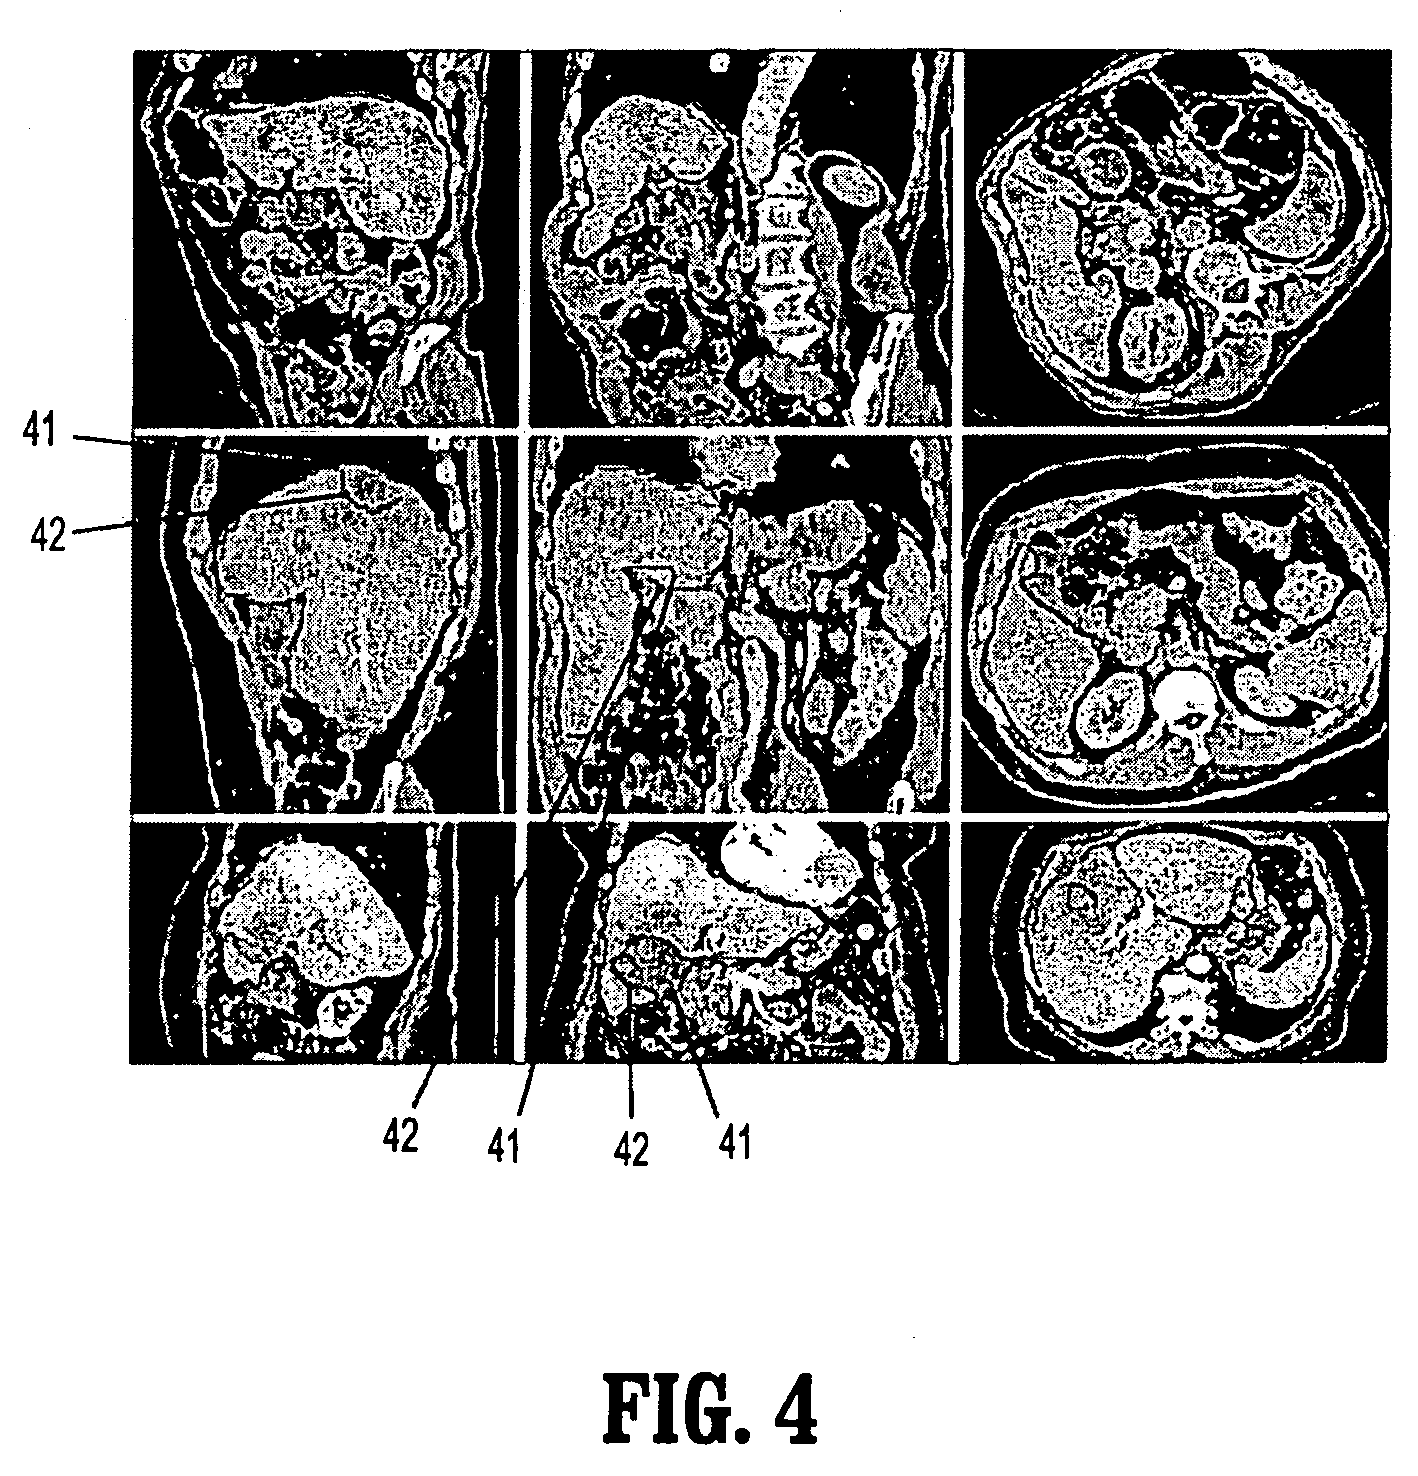 System and method for global-to-local shape matching for automatic liver segmentation in medical imaging